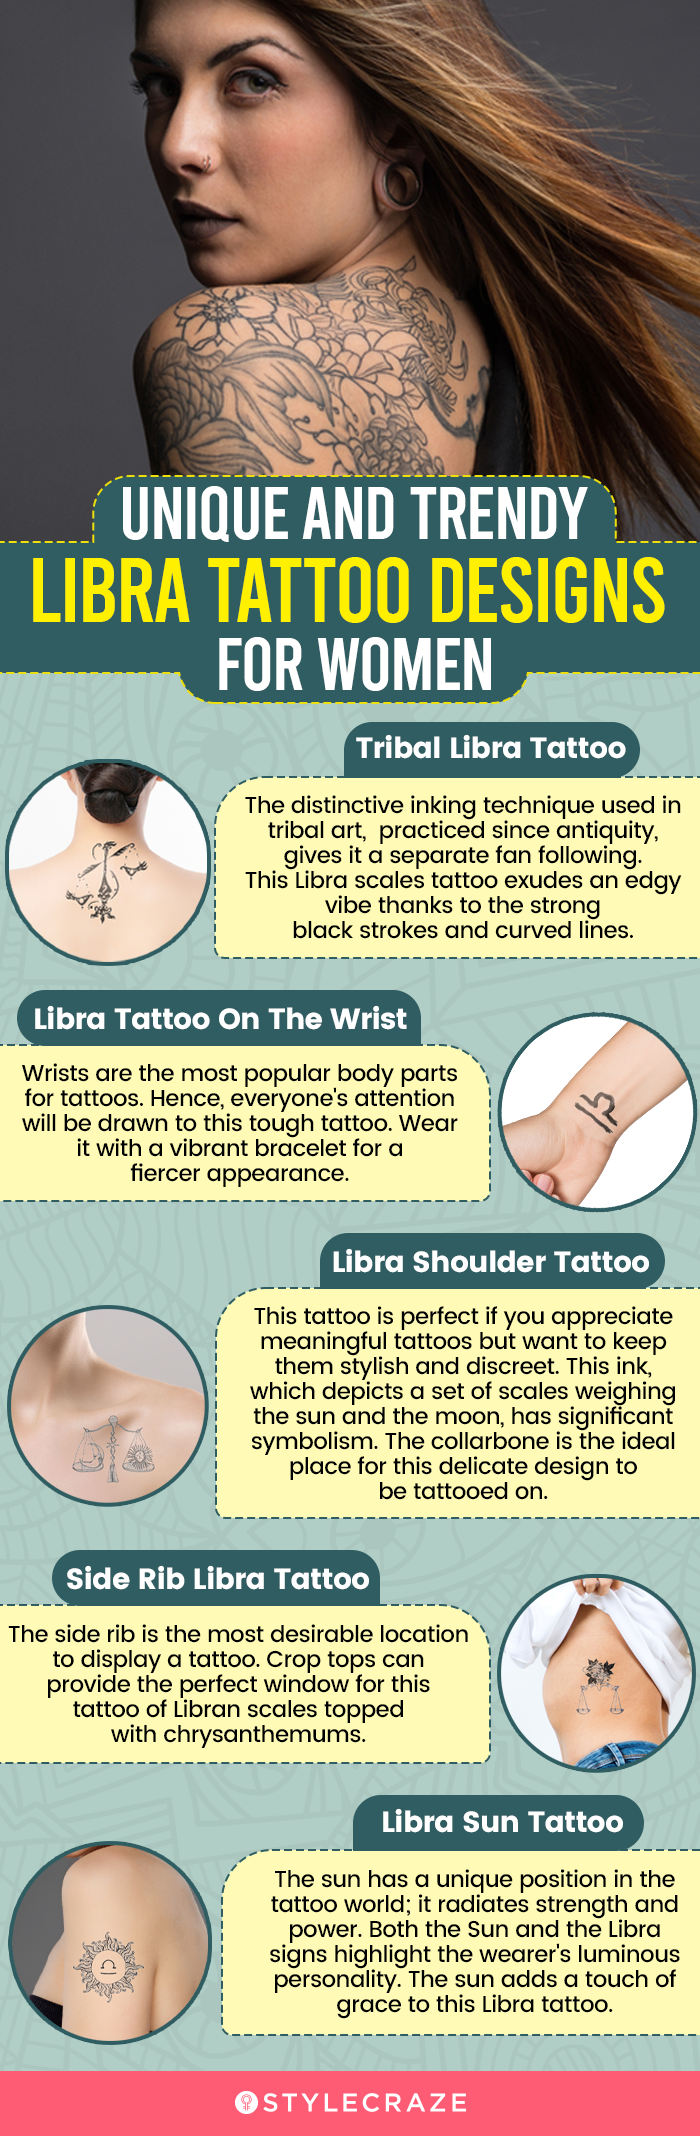 unique and trendy libra tattoo designs for women (infographic)